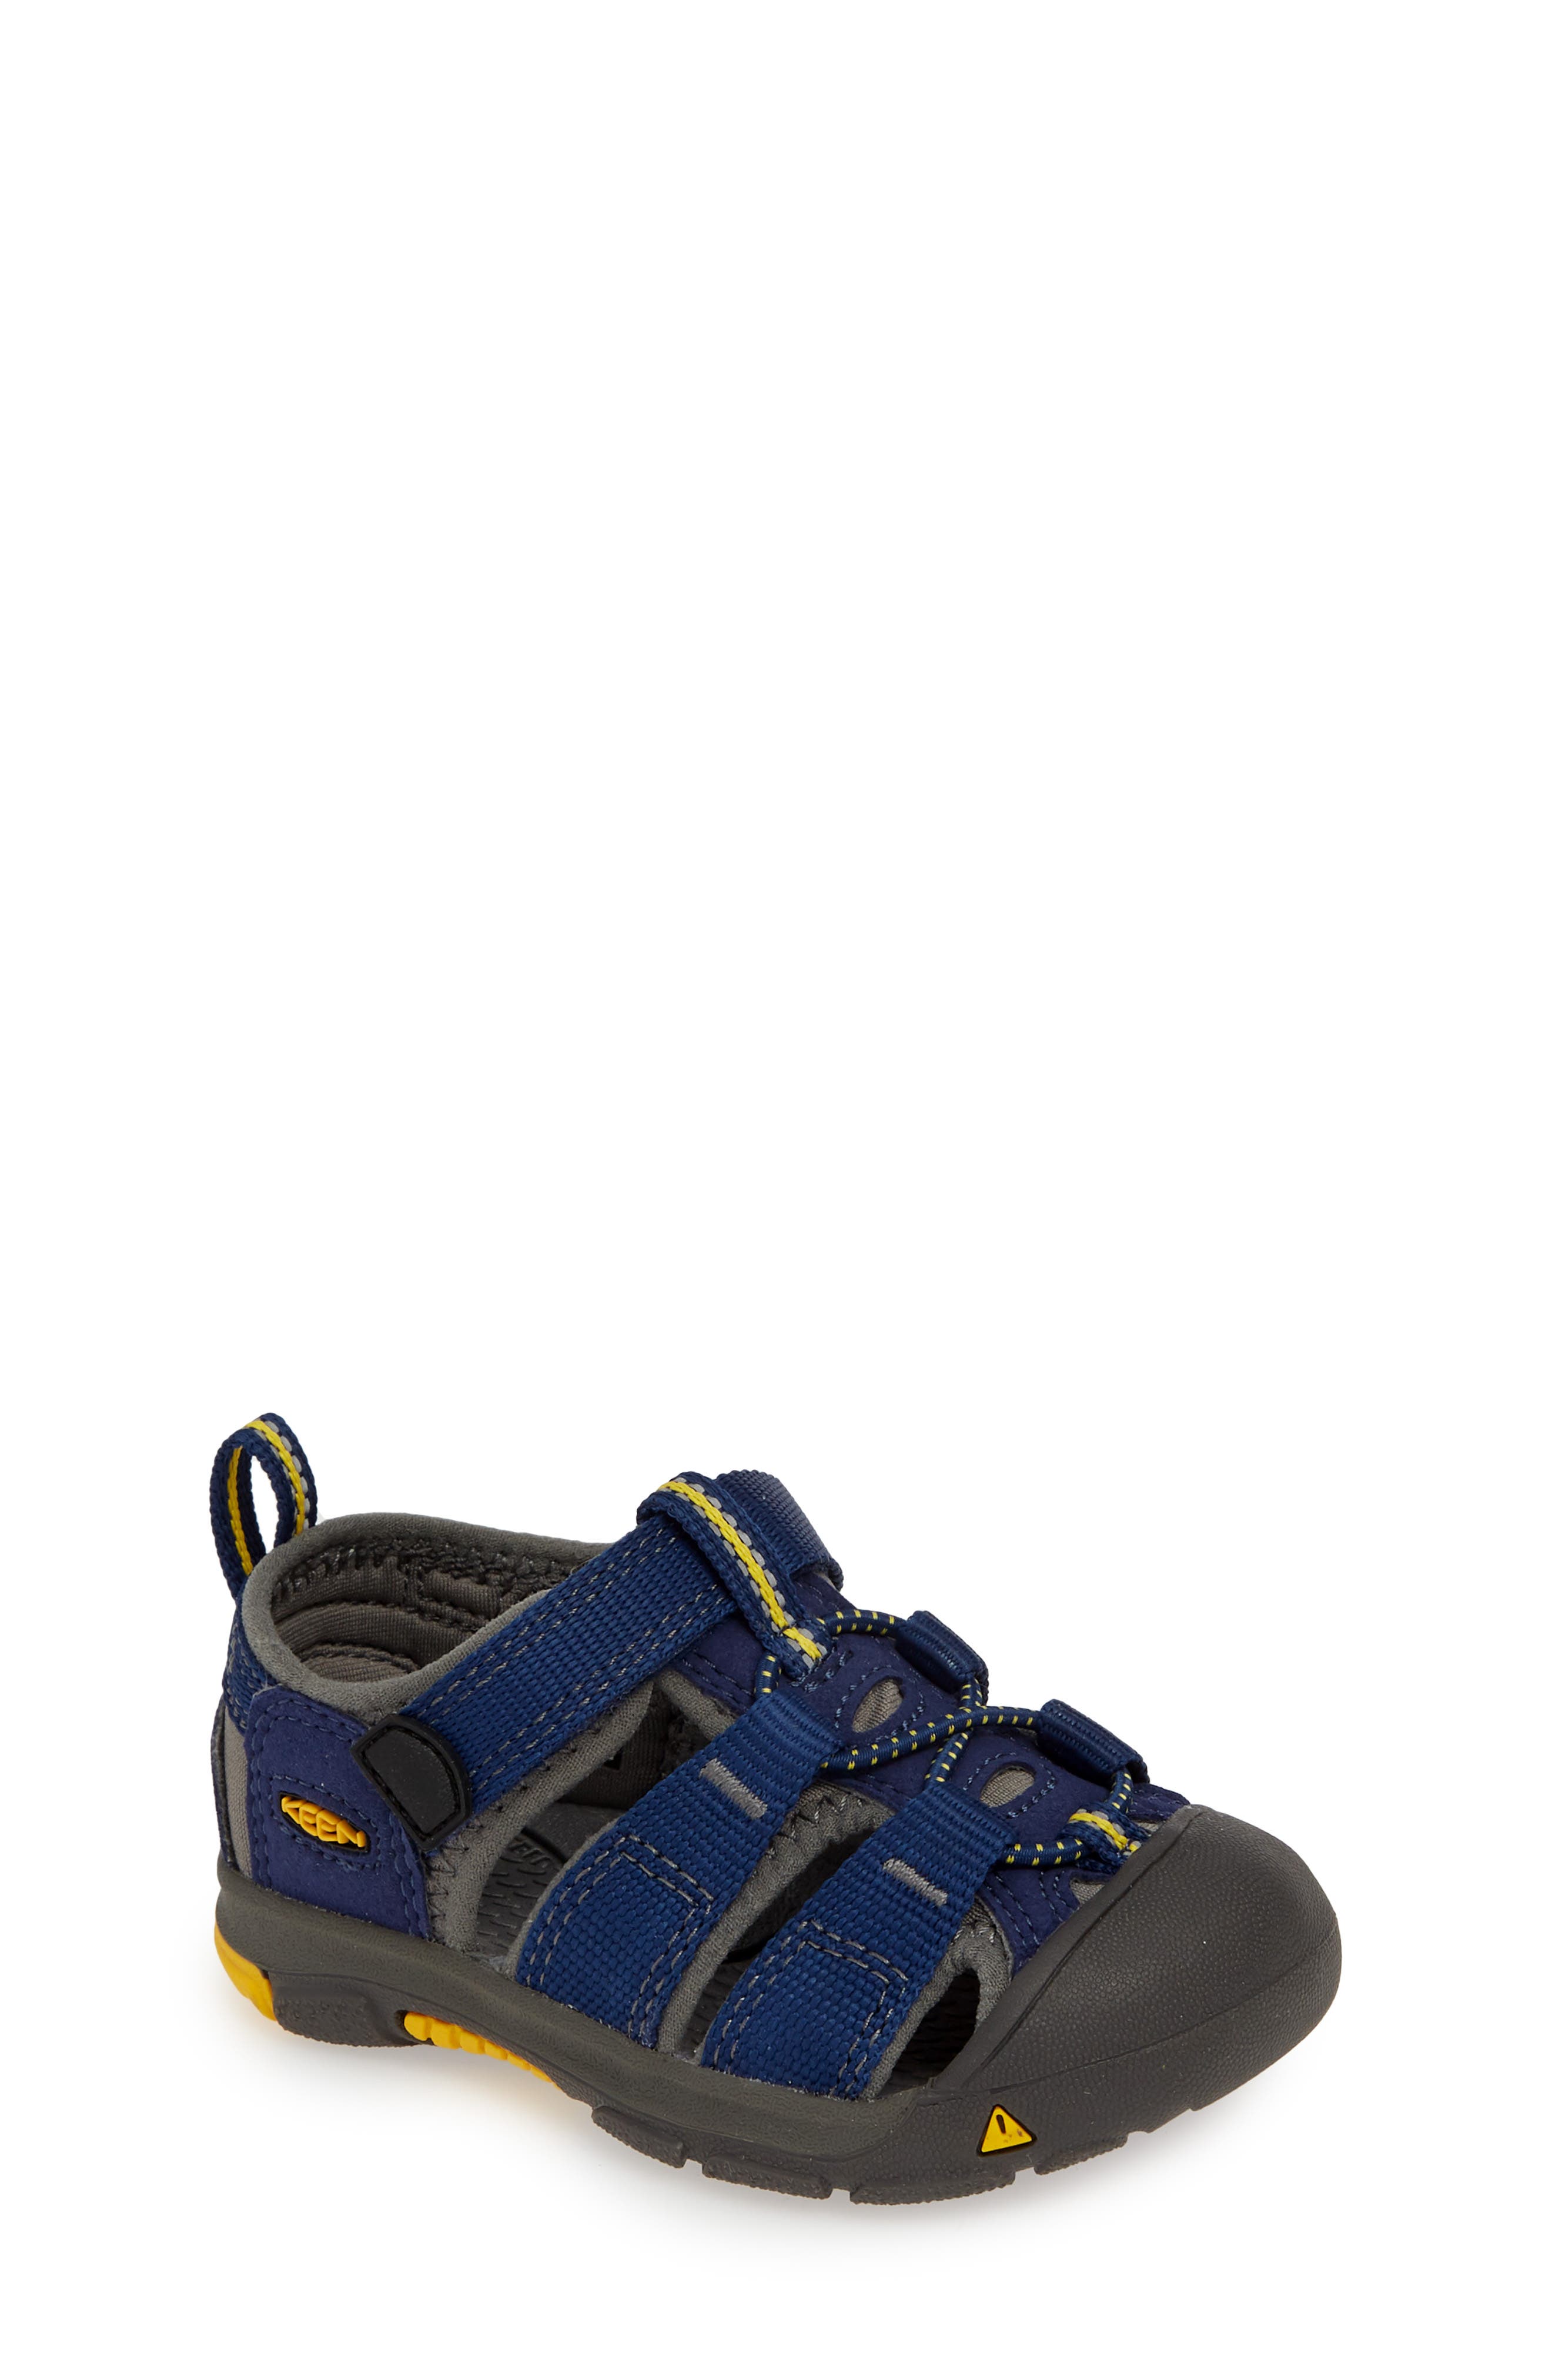 Big Boys' Keen Shoes (Sizes 3.5-7) | Nordstrom